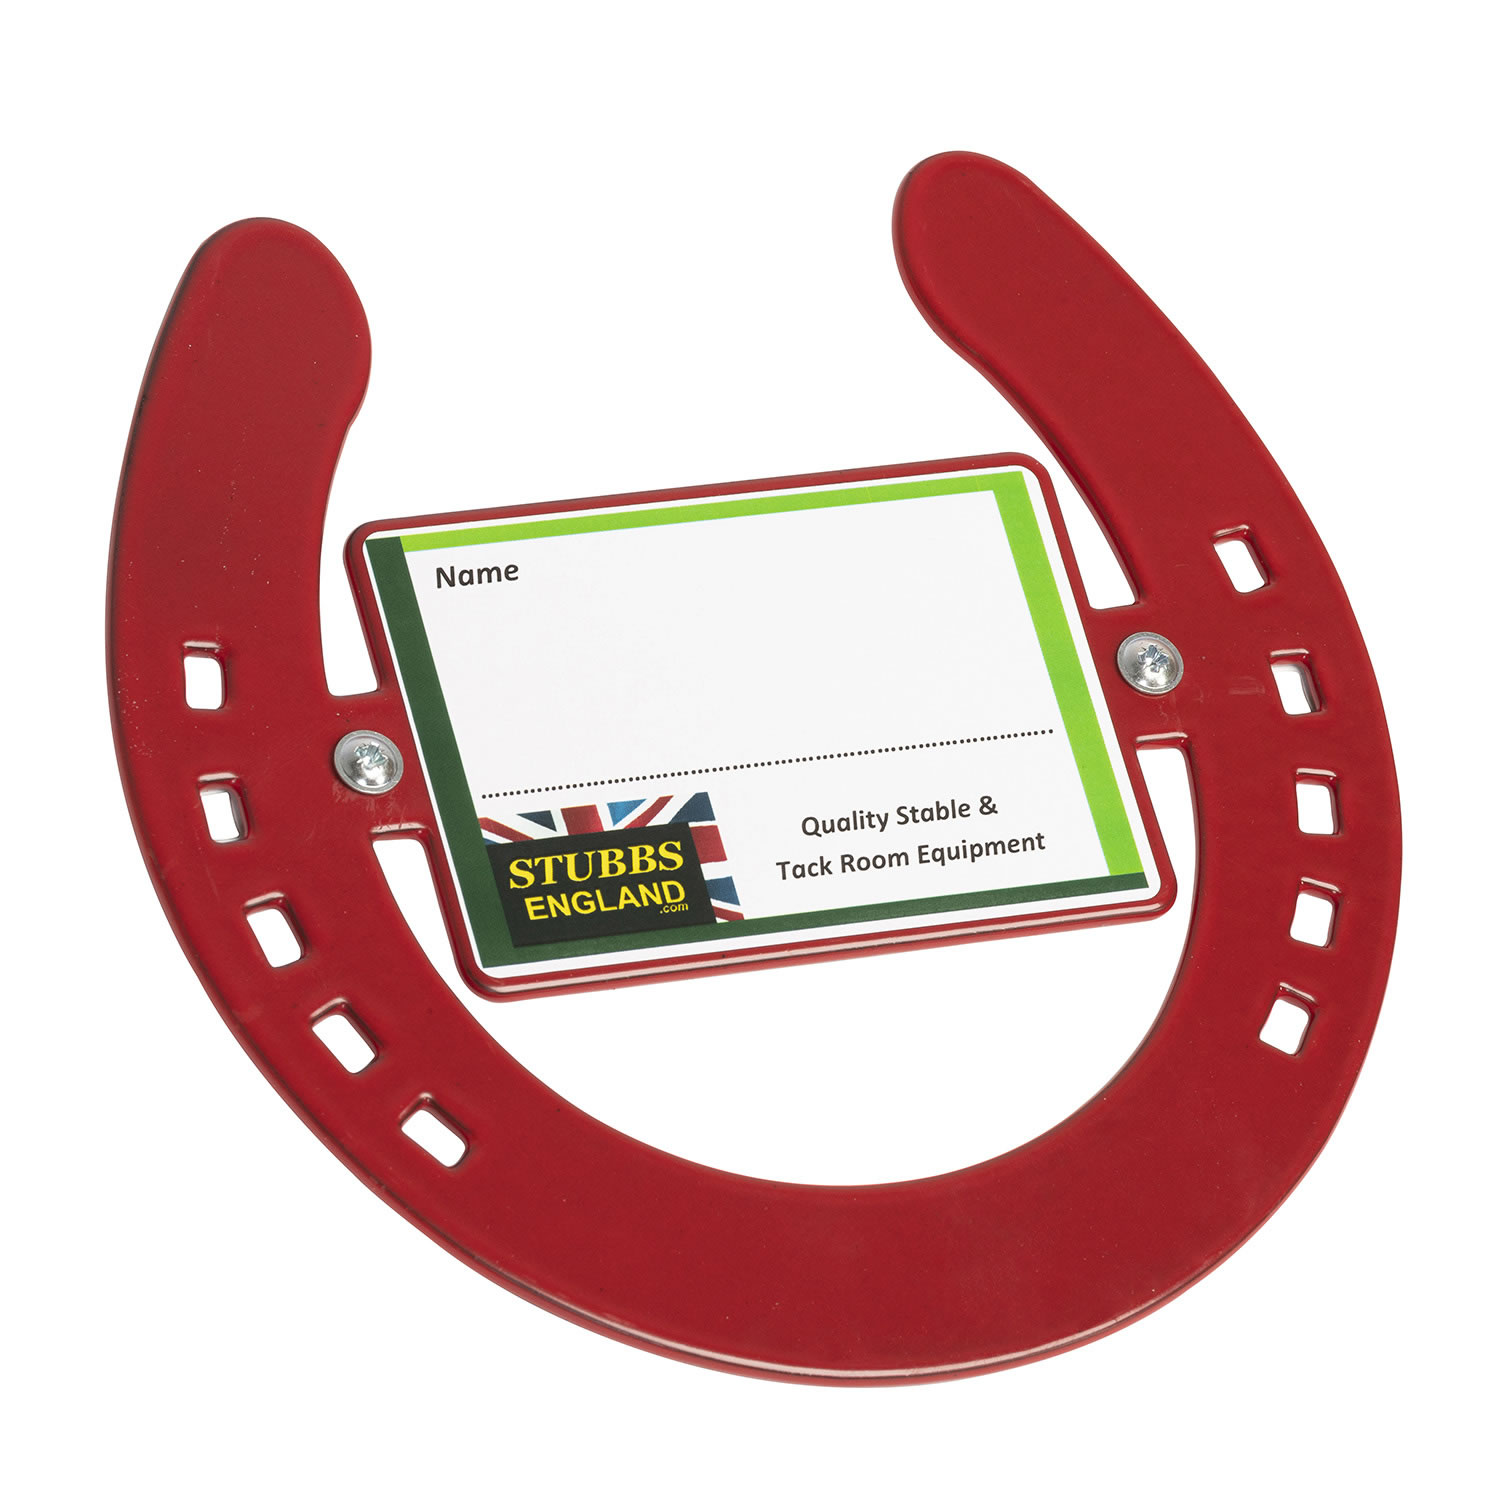 STUBBS HORSESHOE WITH NAME PLATE S2670 RED